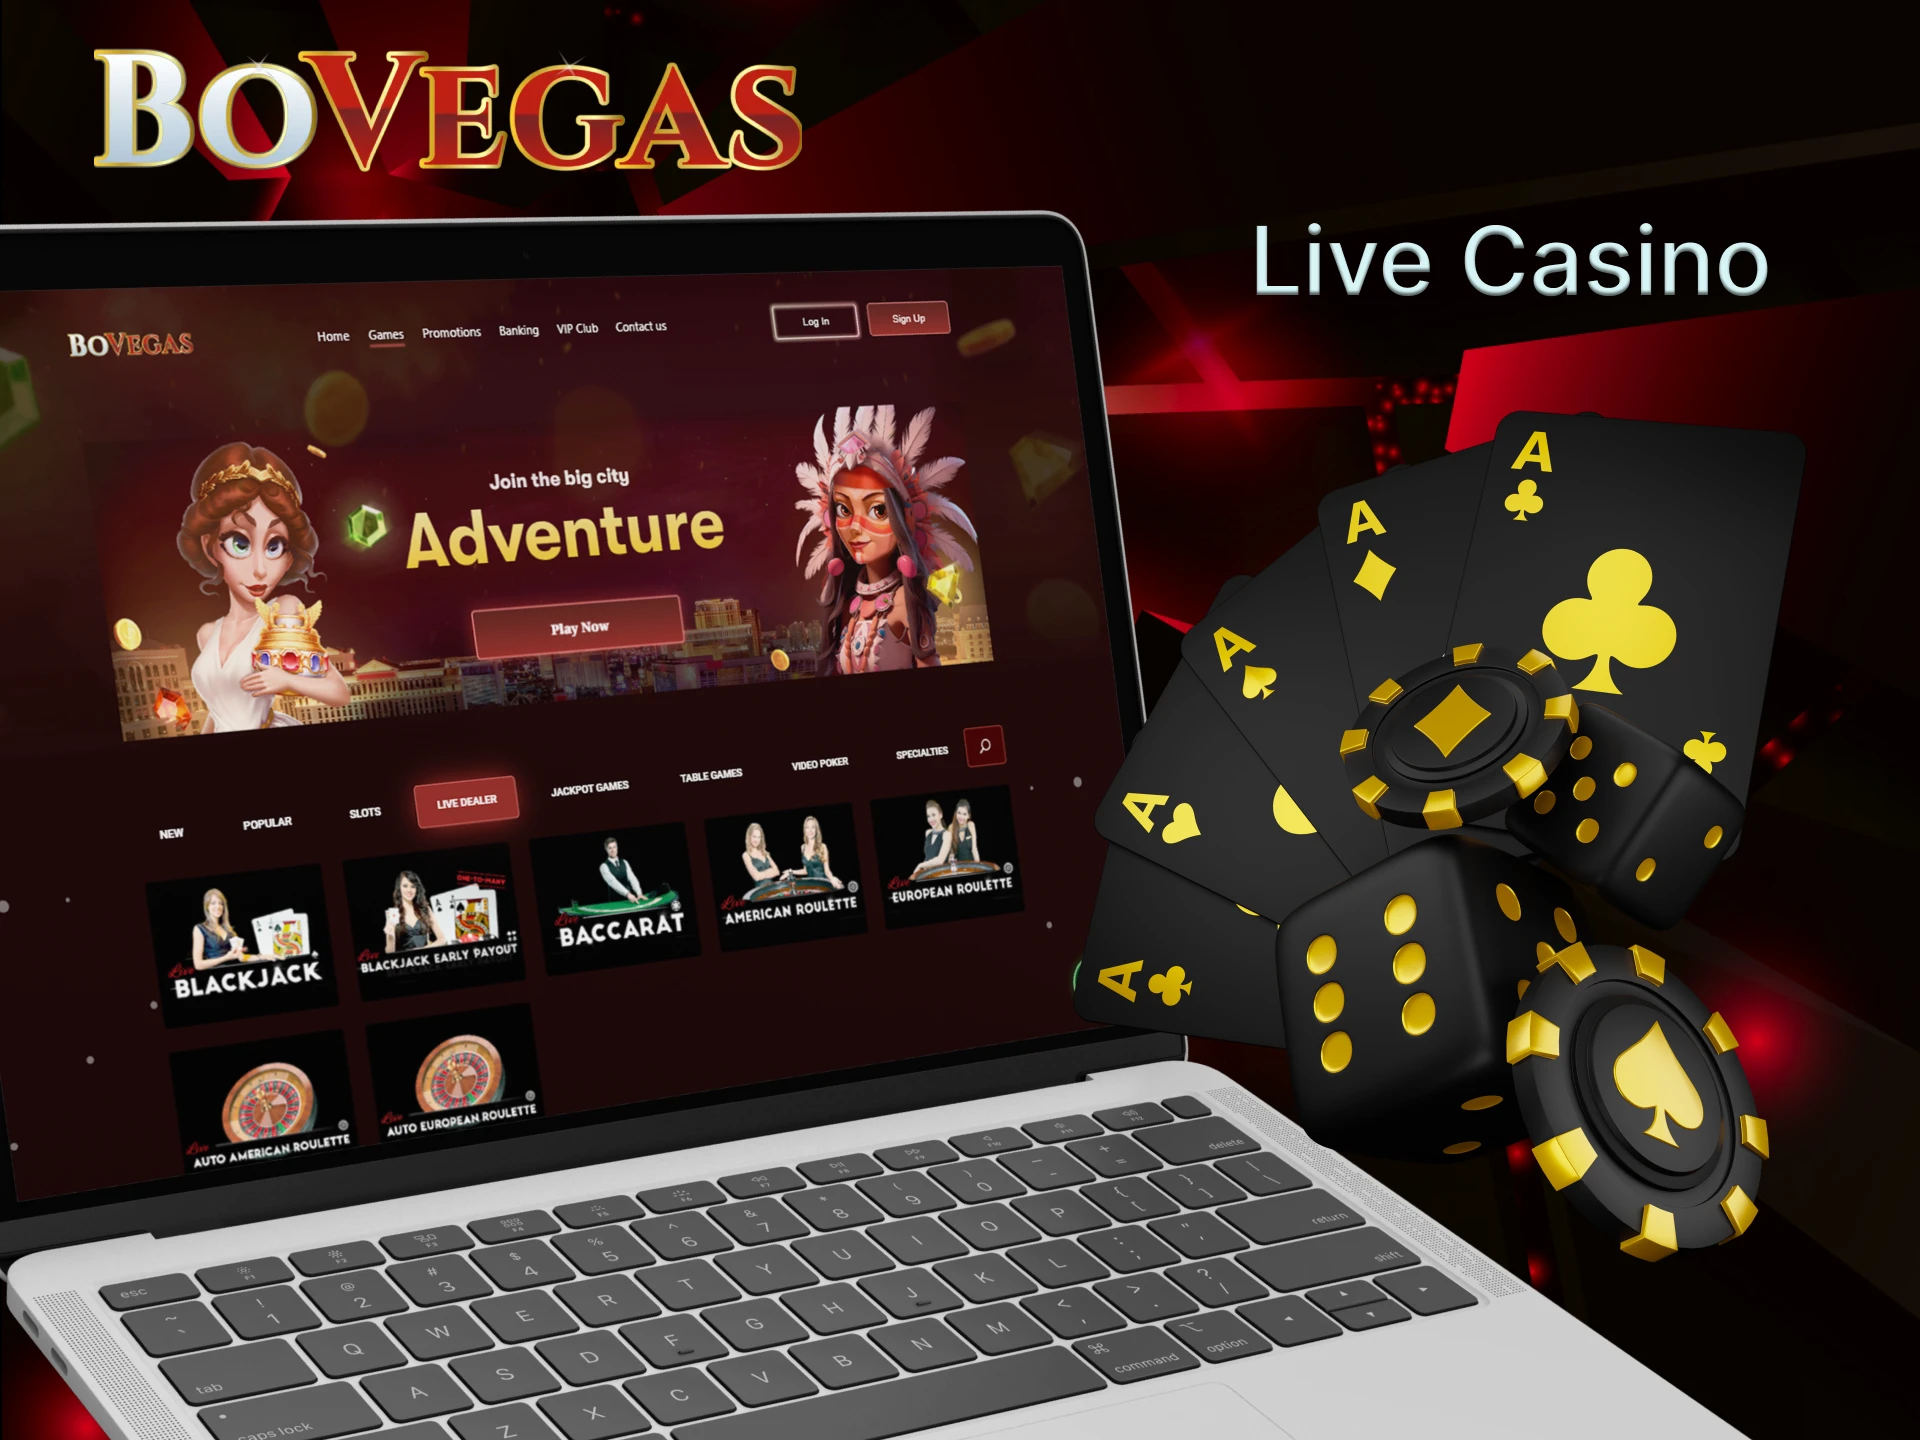 BoVegas Casino has a large selection of live games.